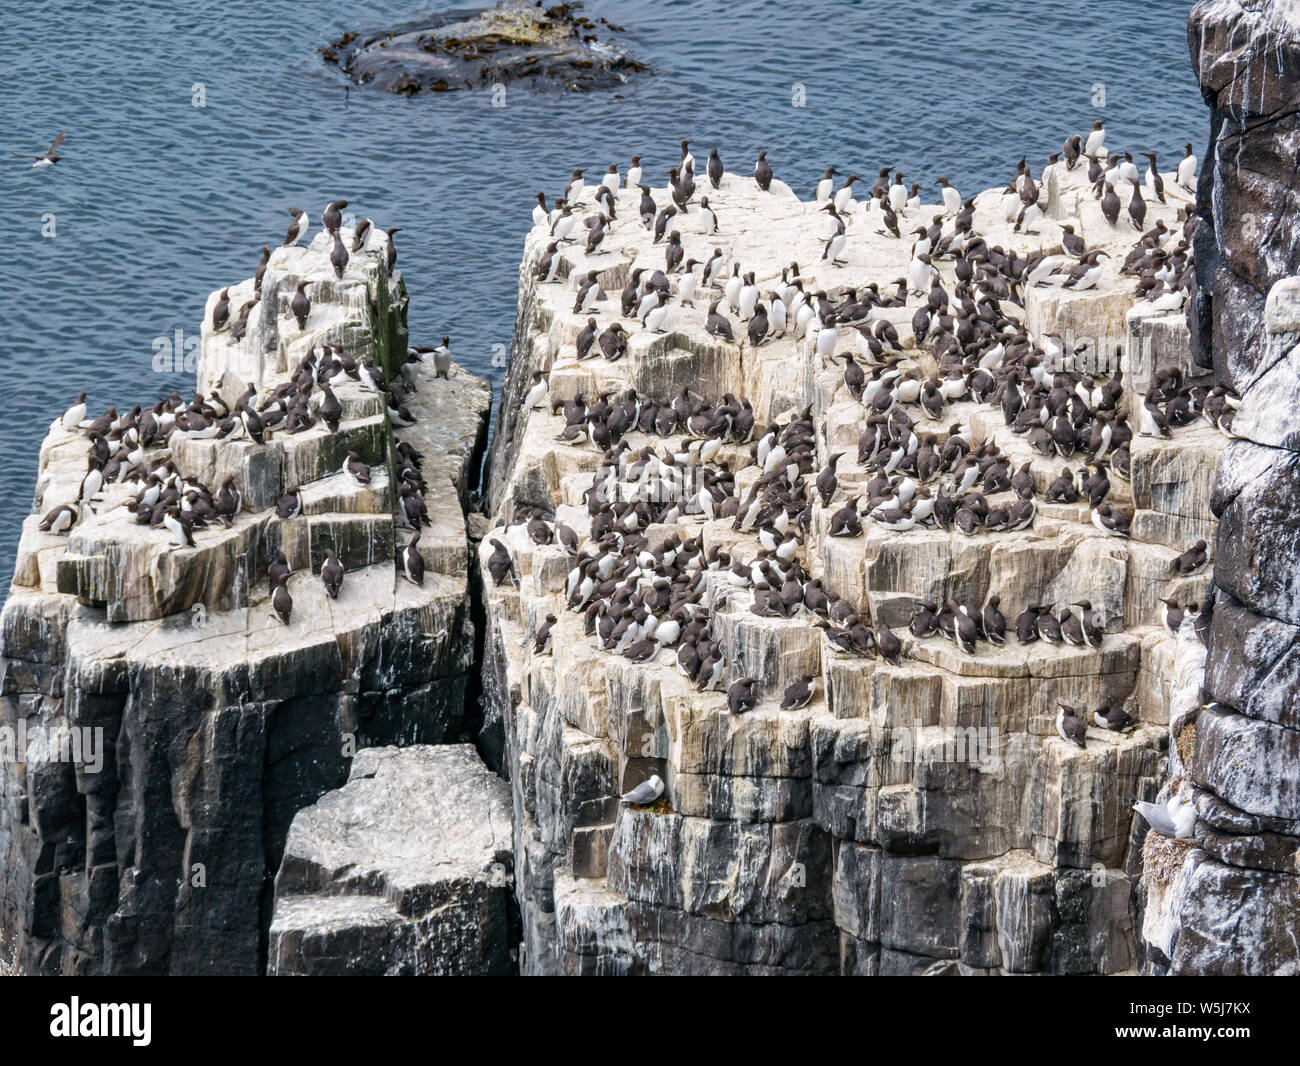 Rock stack cliffs with guillemot seabirds, Uria aalge, Isle of May, Scotland, UK Stock Photo